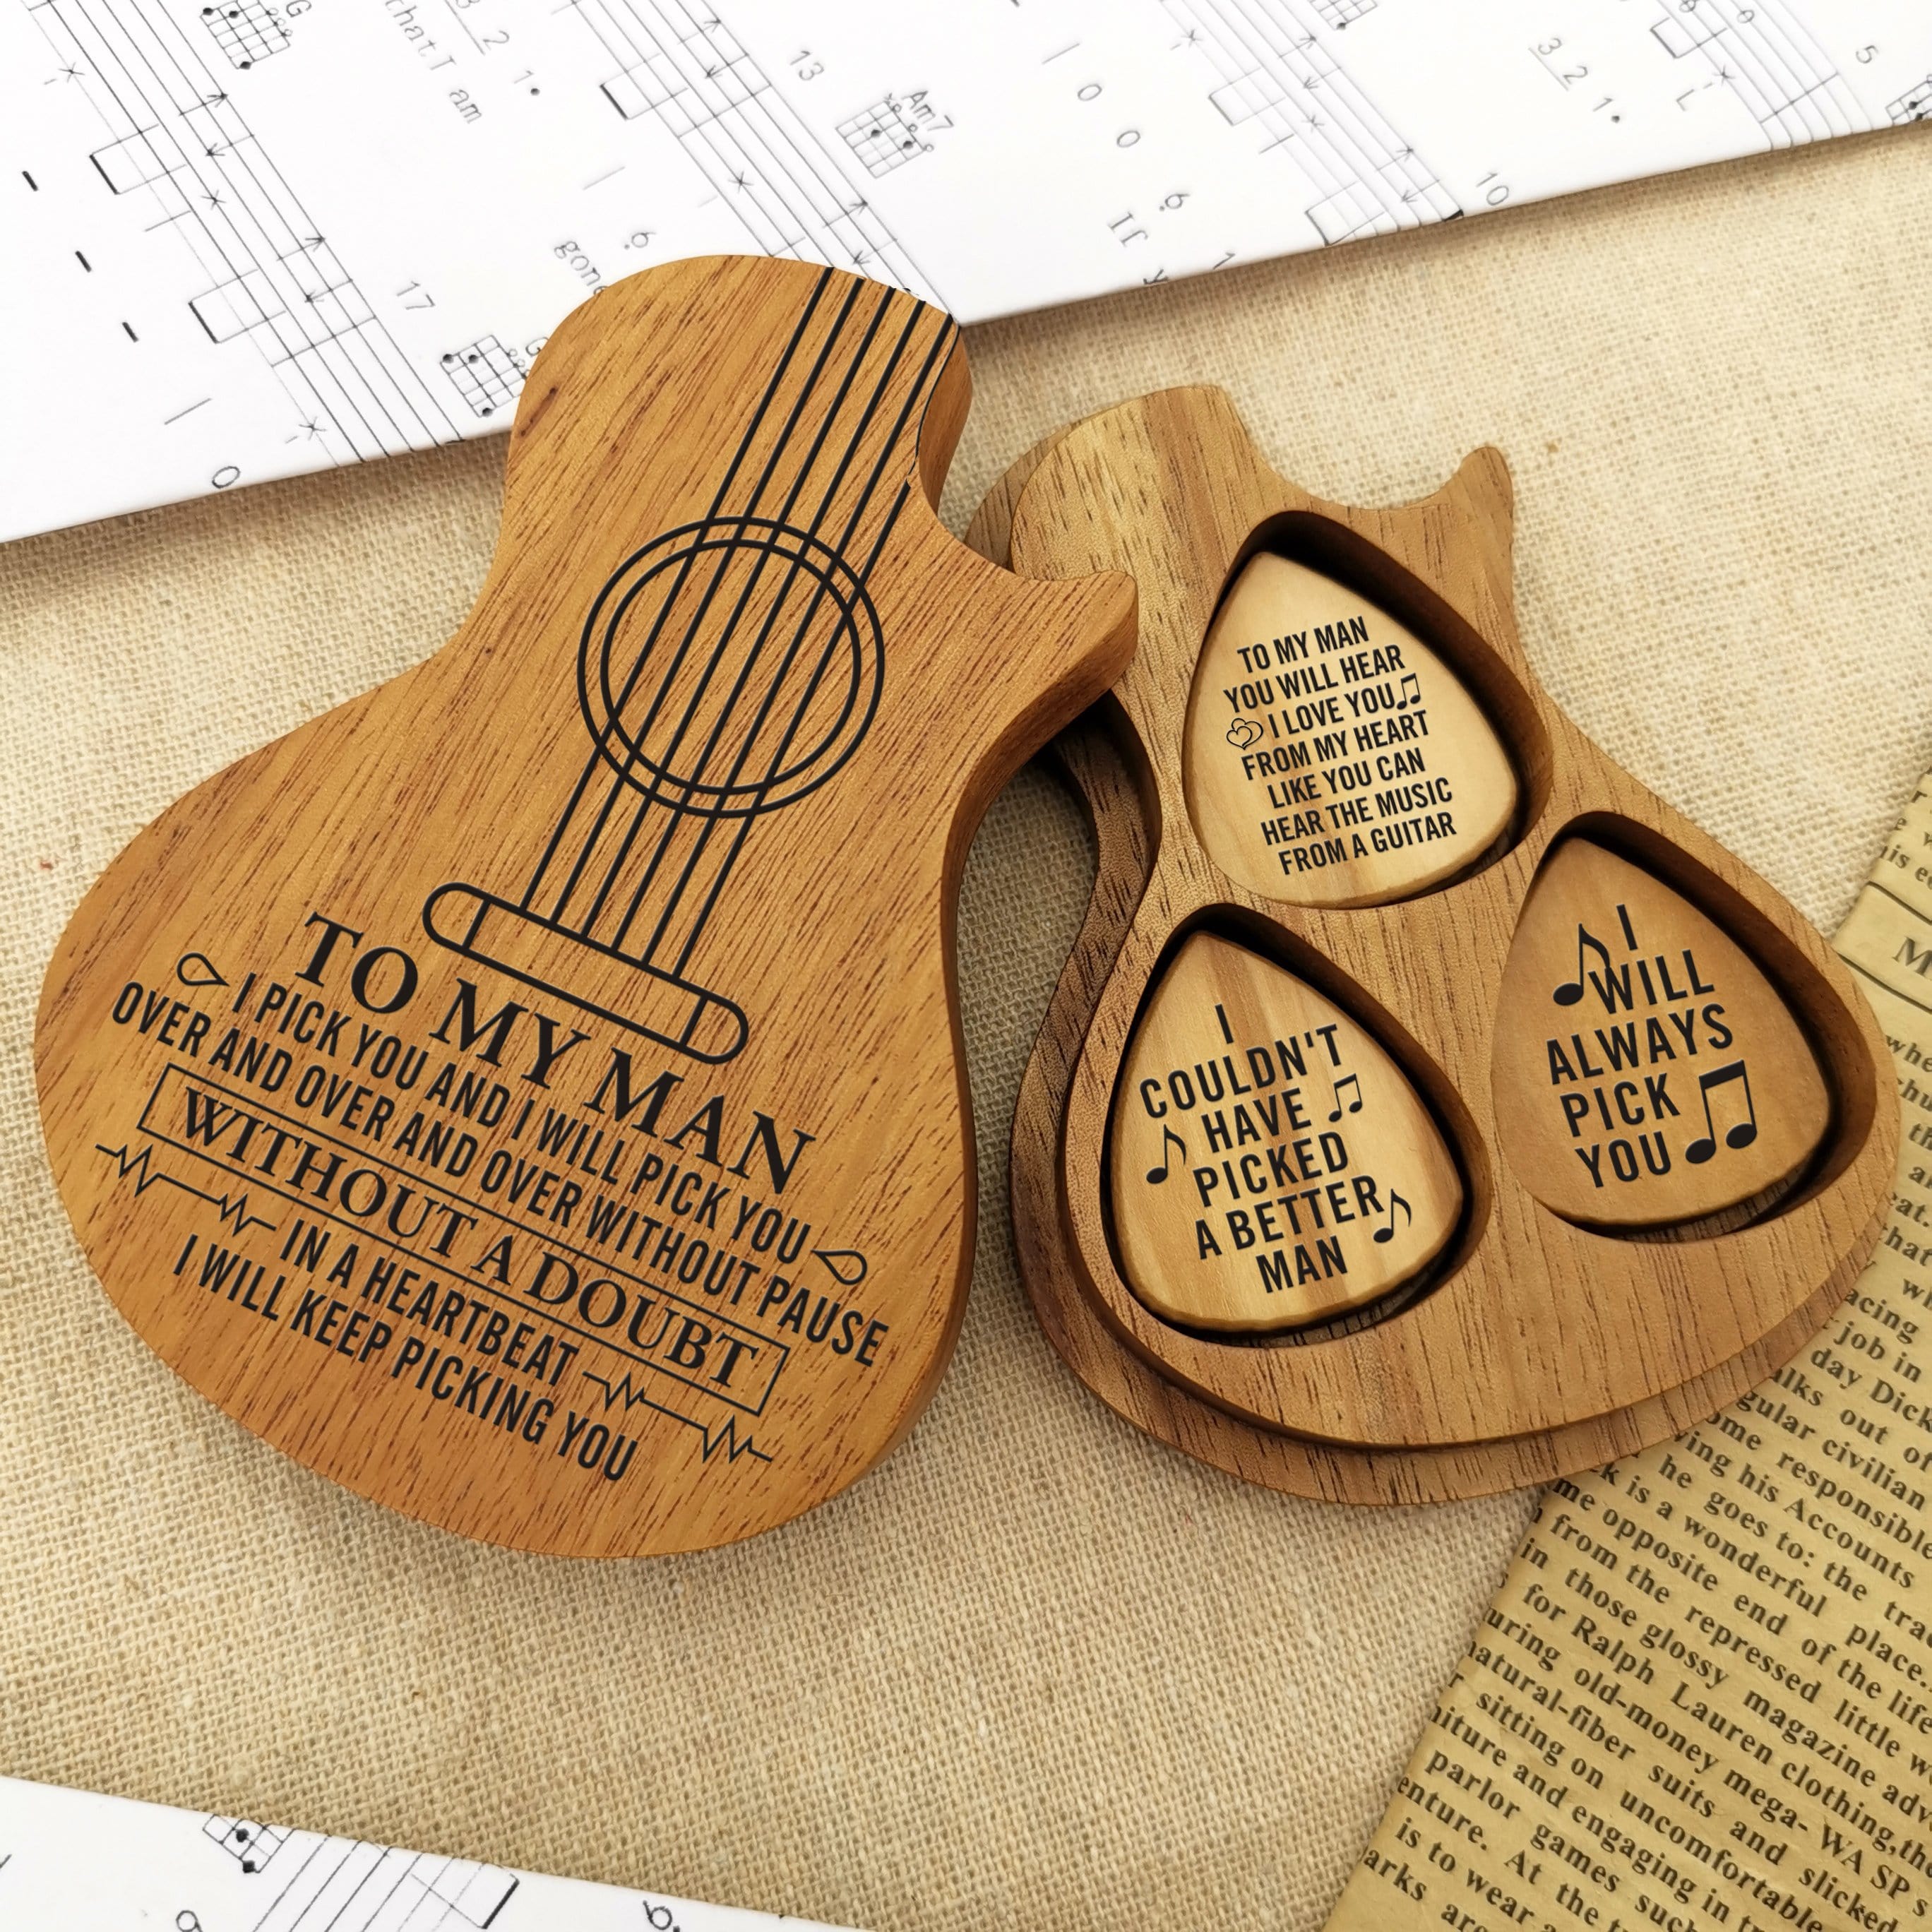 Guitar Picks To My Man - I Will Keep Picking You Wood Guitar Picks With Case GiveMe-Gifts